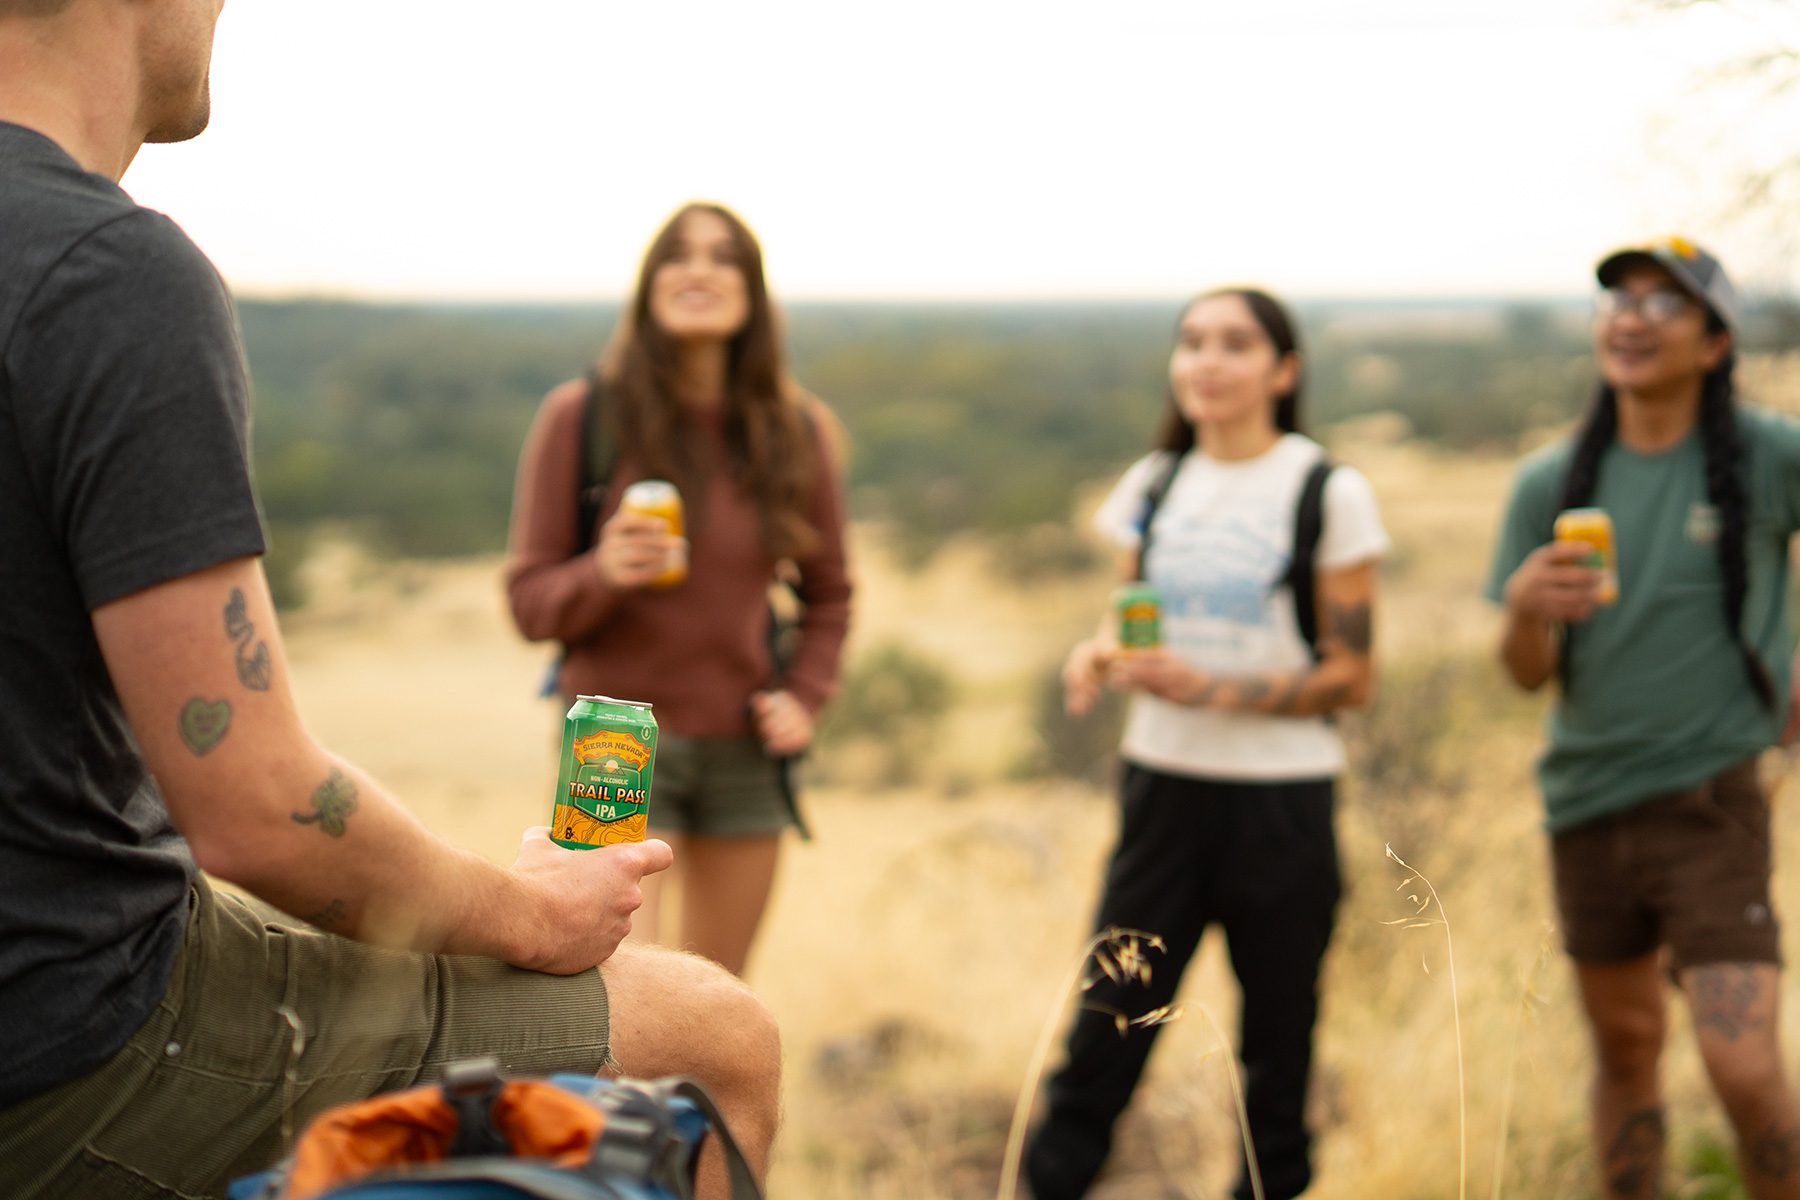 Four friends on a hike take a break to drink cans of non-alcoholic Sierra Nevada Trail Pass brews